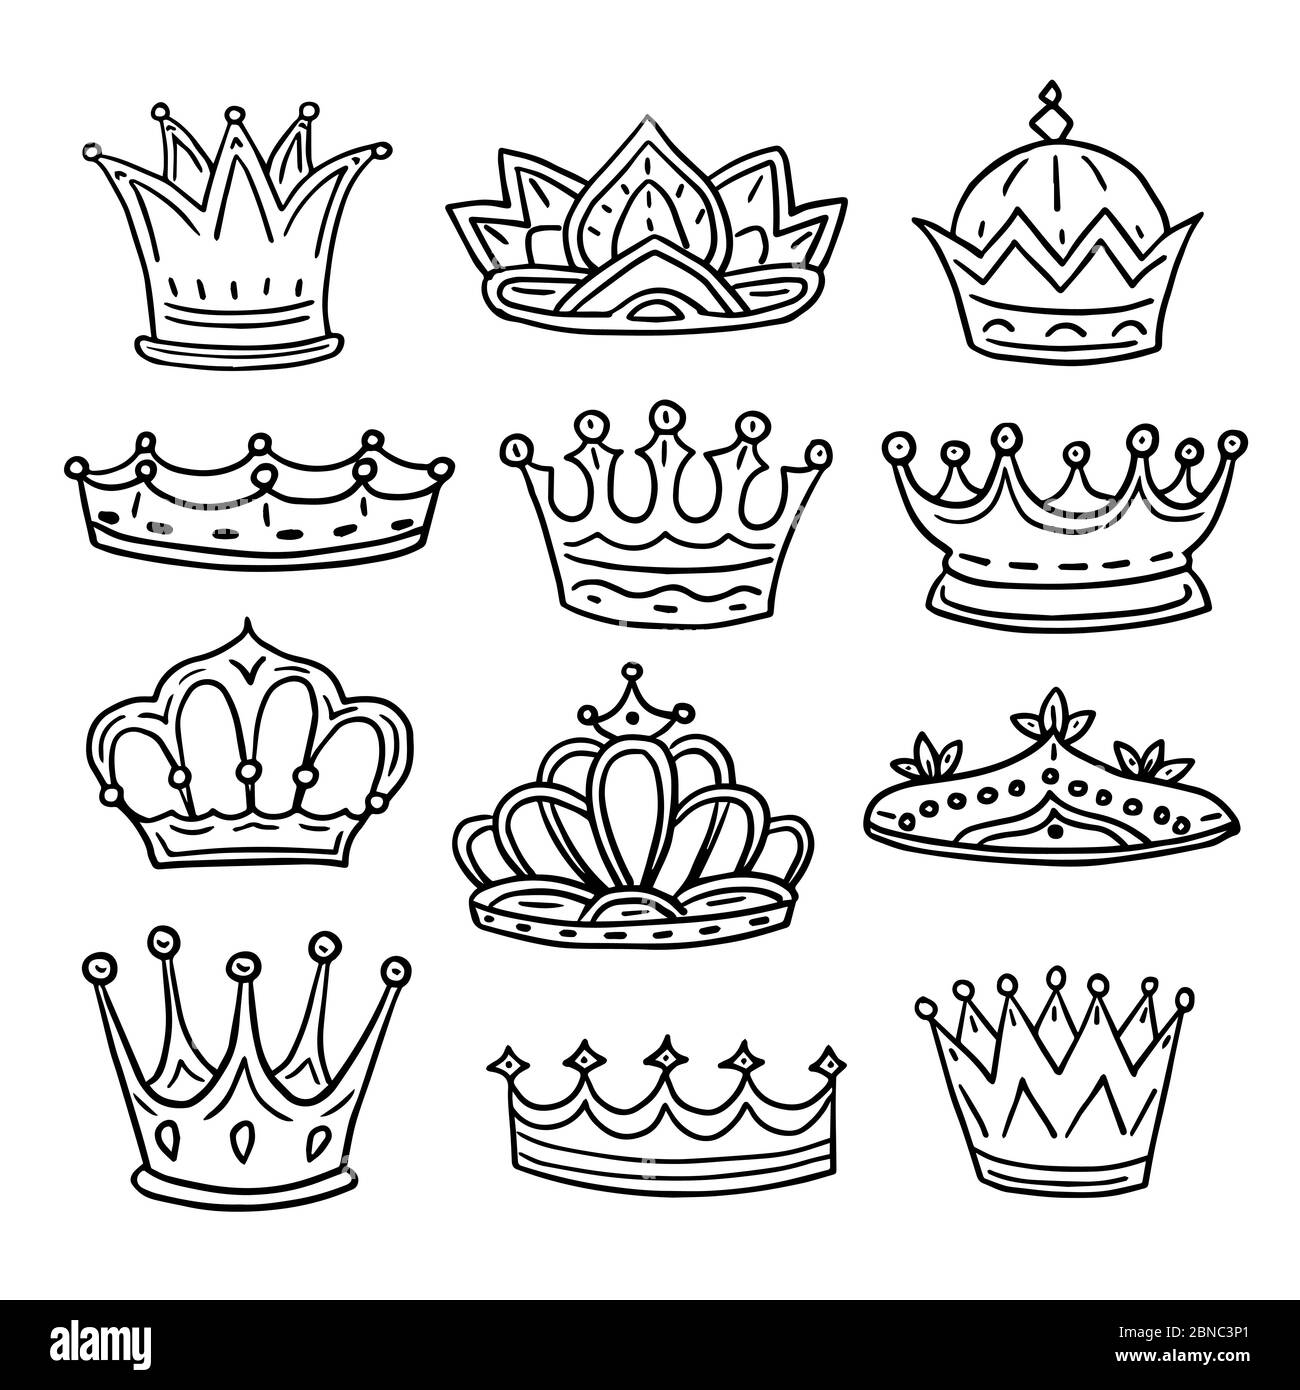 Hand drawn crowns. King, queen doodle crown and princess tiara. Vintage royal sketch isolated vector icons. Crown sketch for king and princess, queen and prince illustration Stock Vector